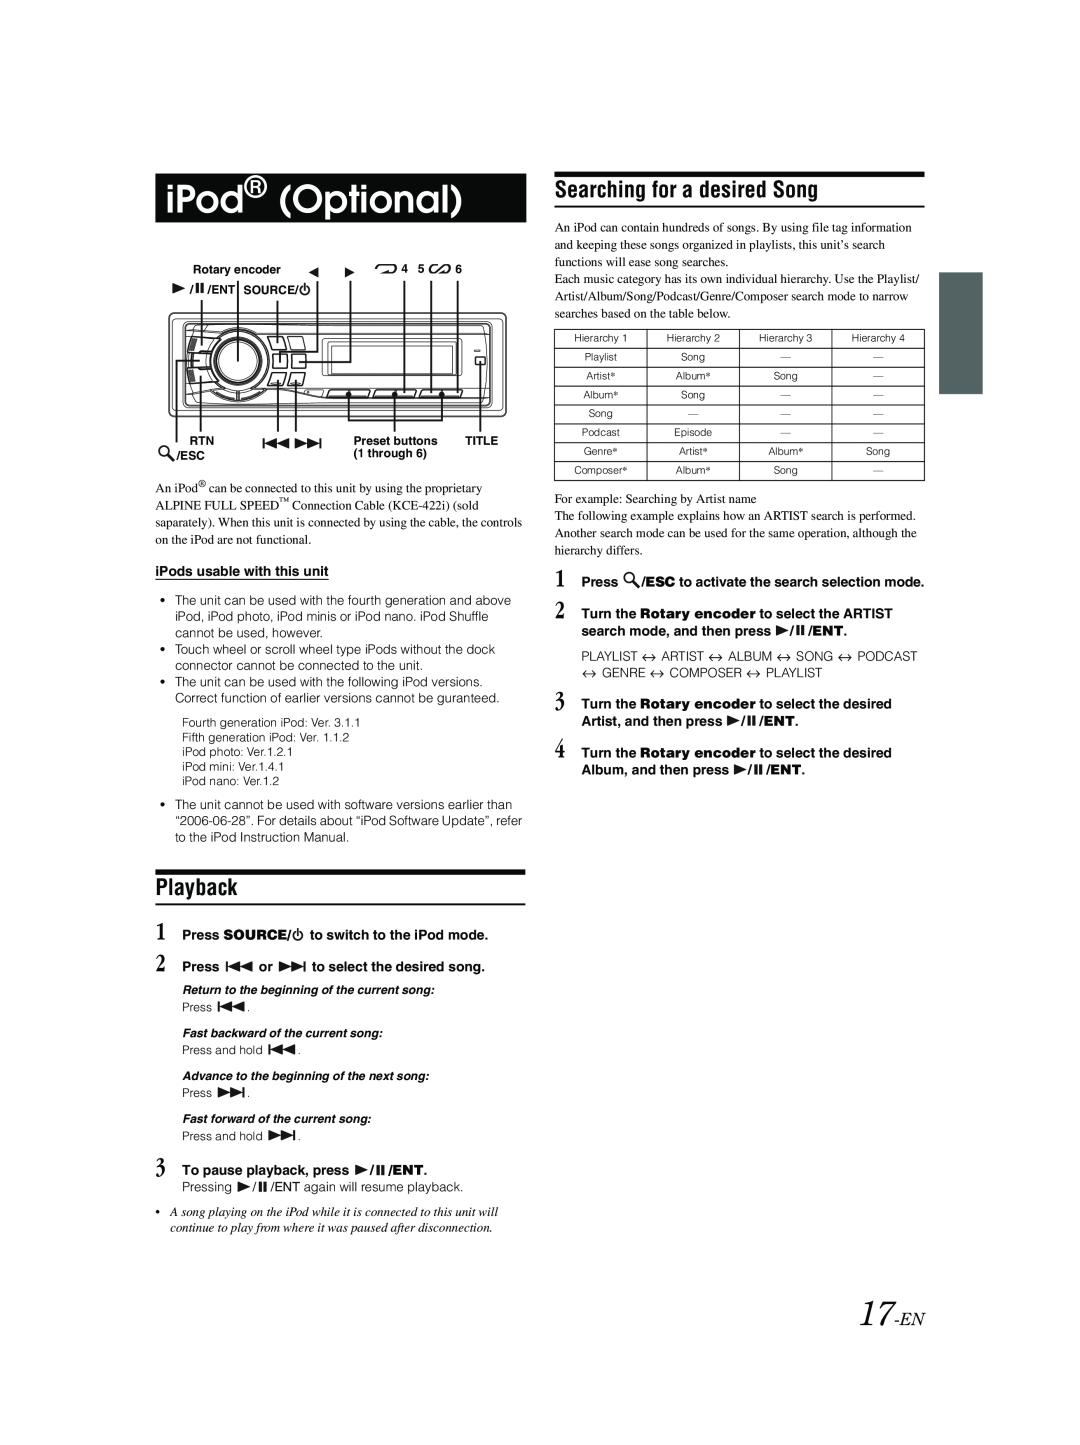 Alpine CDE-9881 owner manual iPod Optional, Searching for a desired Song, 17-EN, Playback 